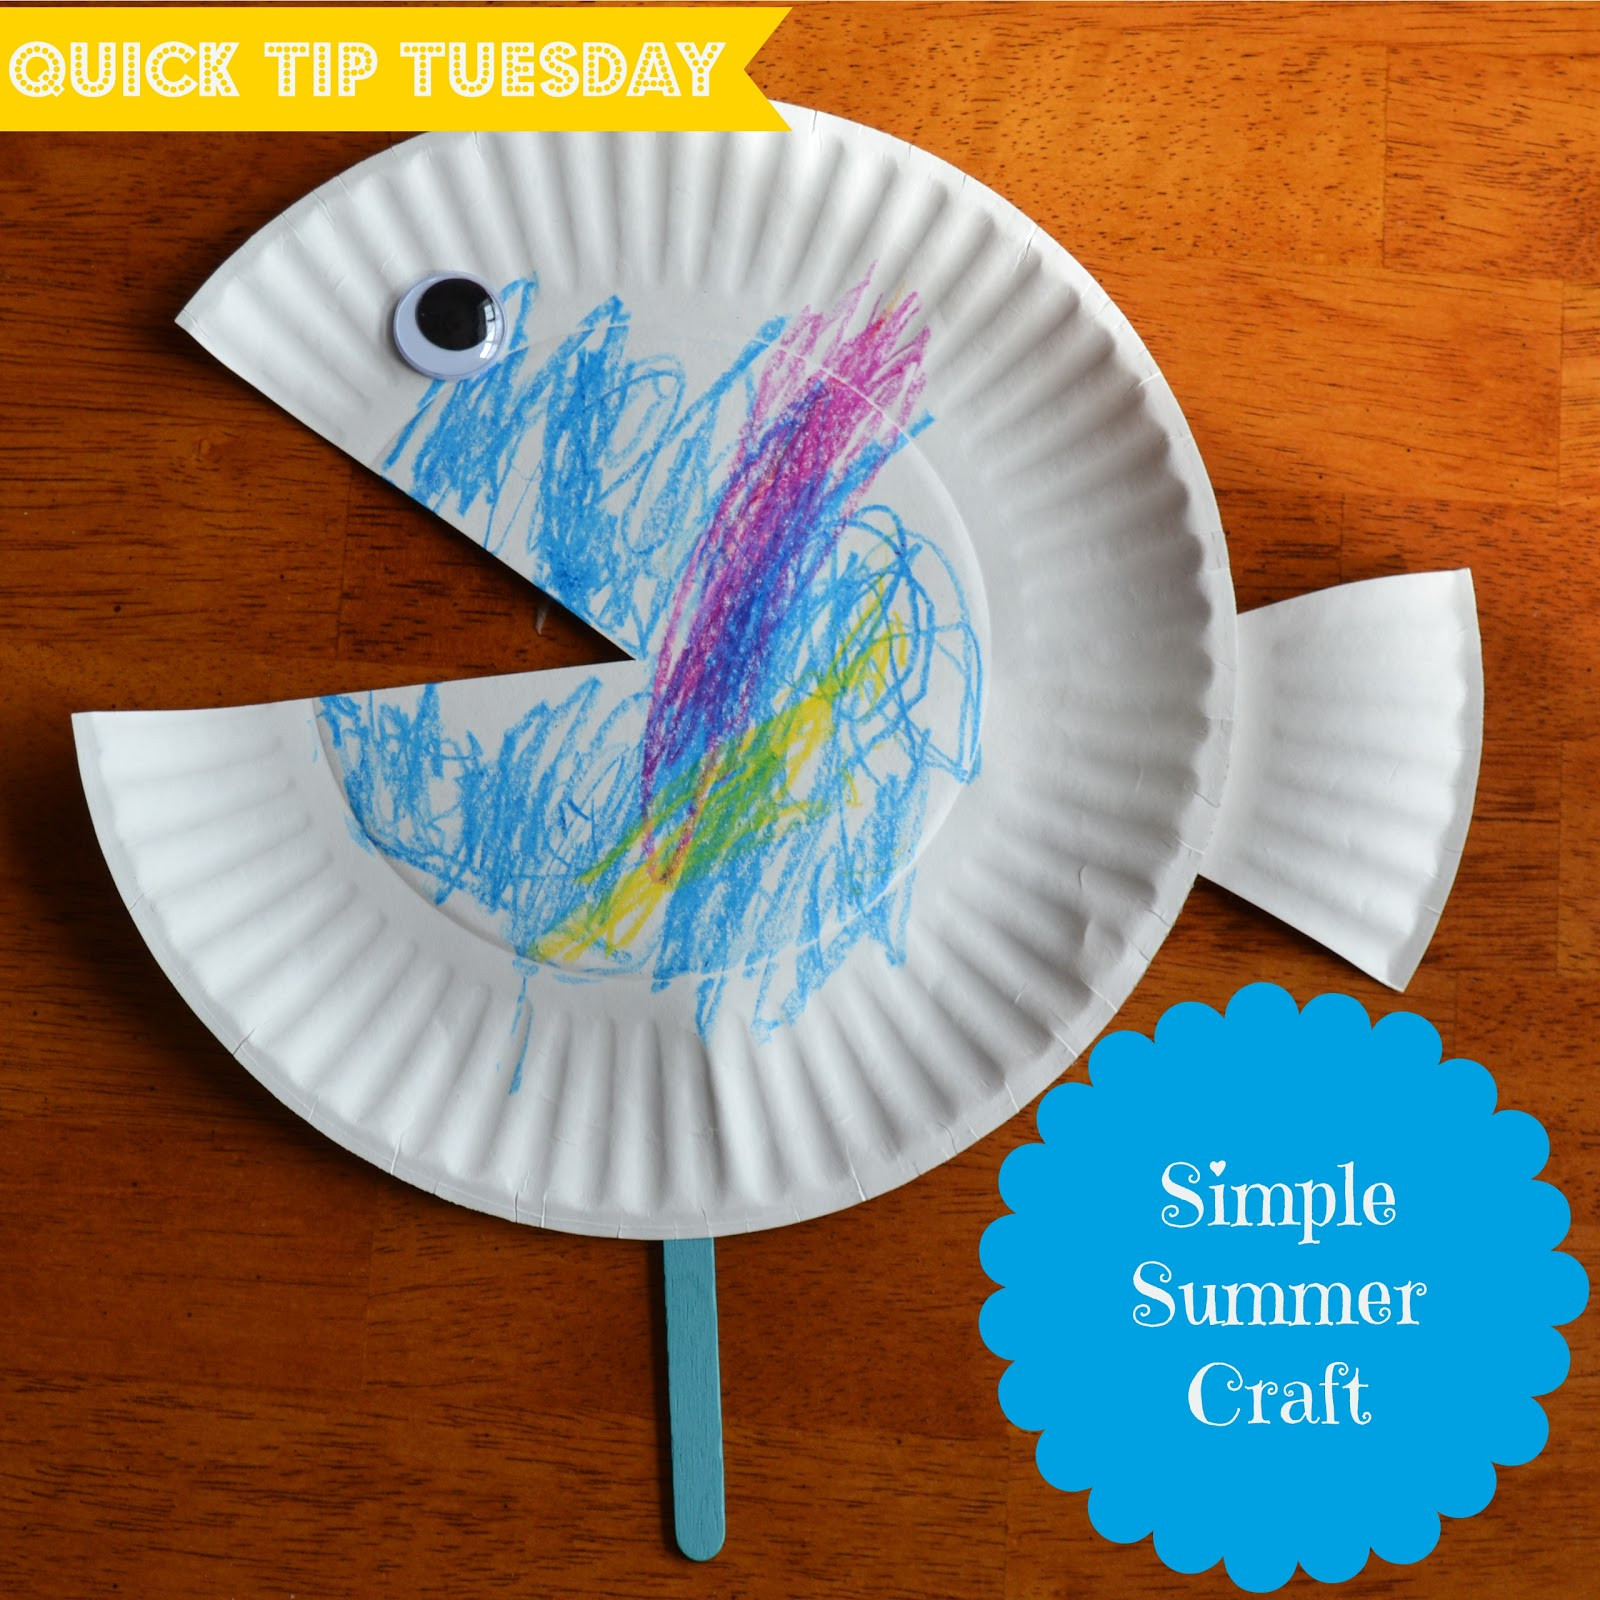 Simple Craft For Preschoolers
 East Coast Mommy Quick Tip Tuesday 5 Simple Summer Craft